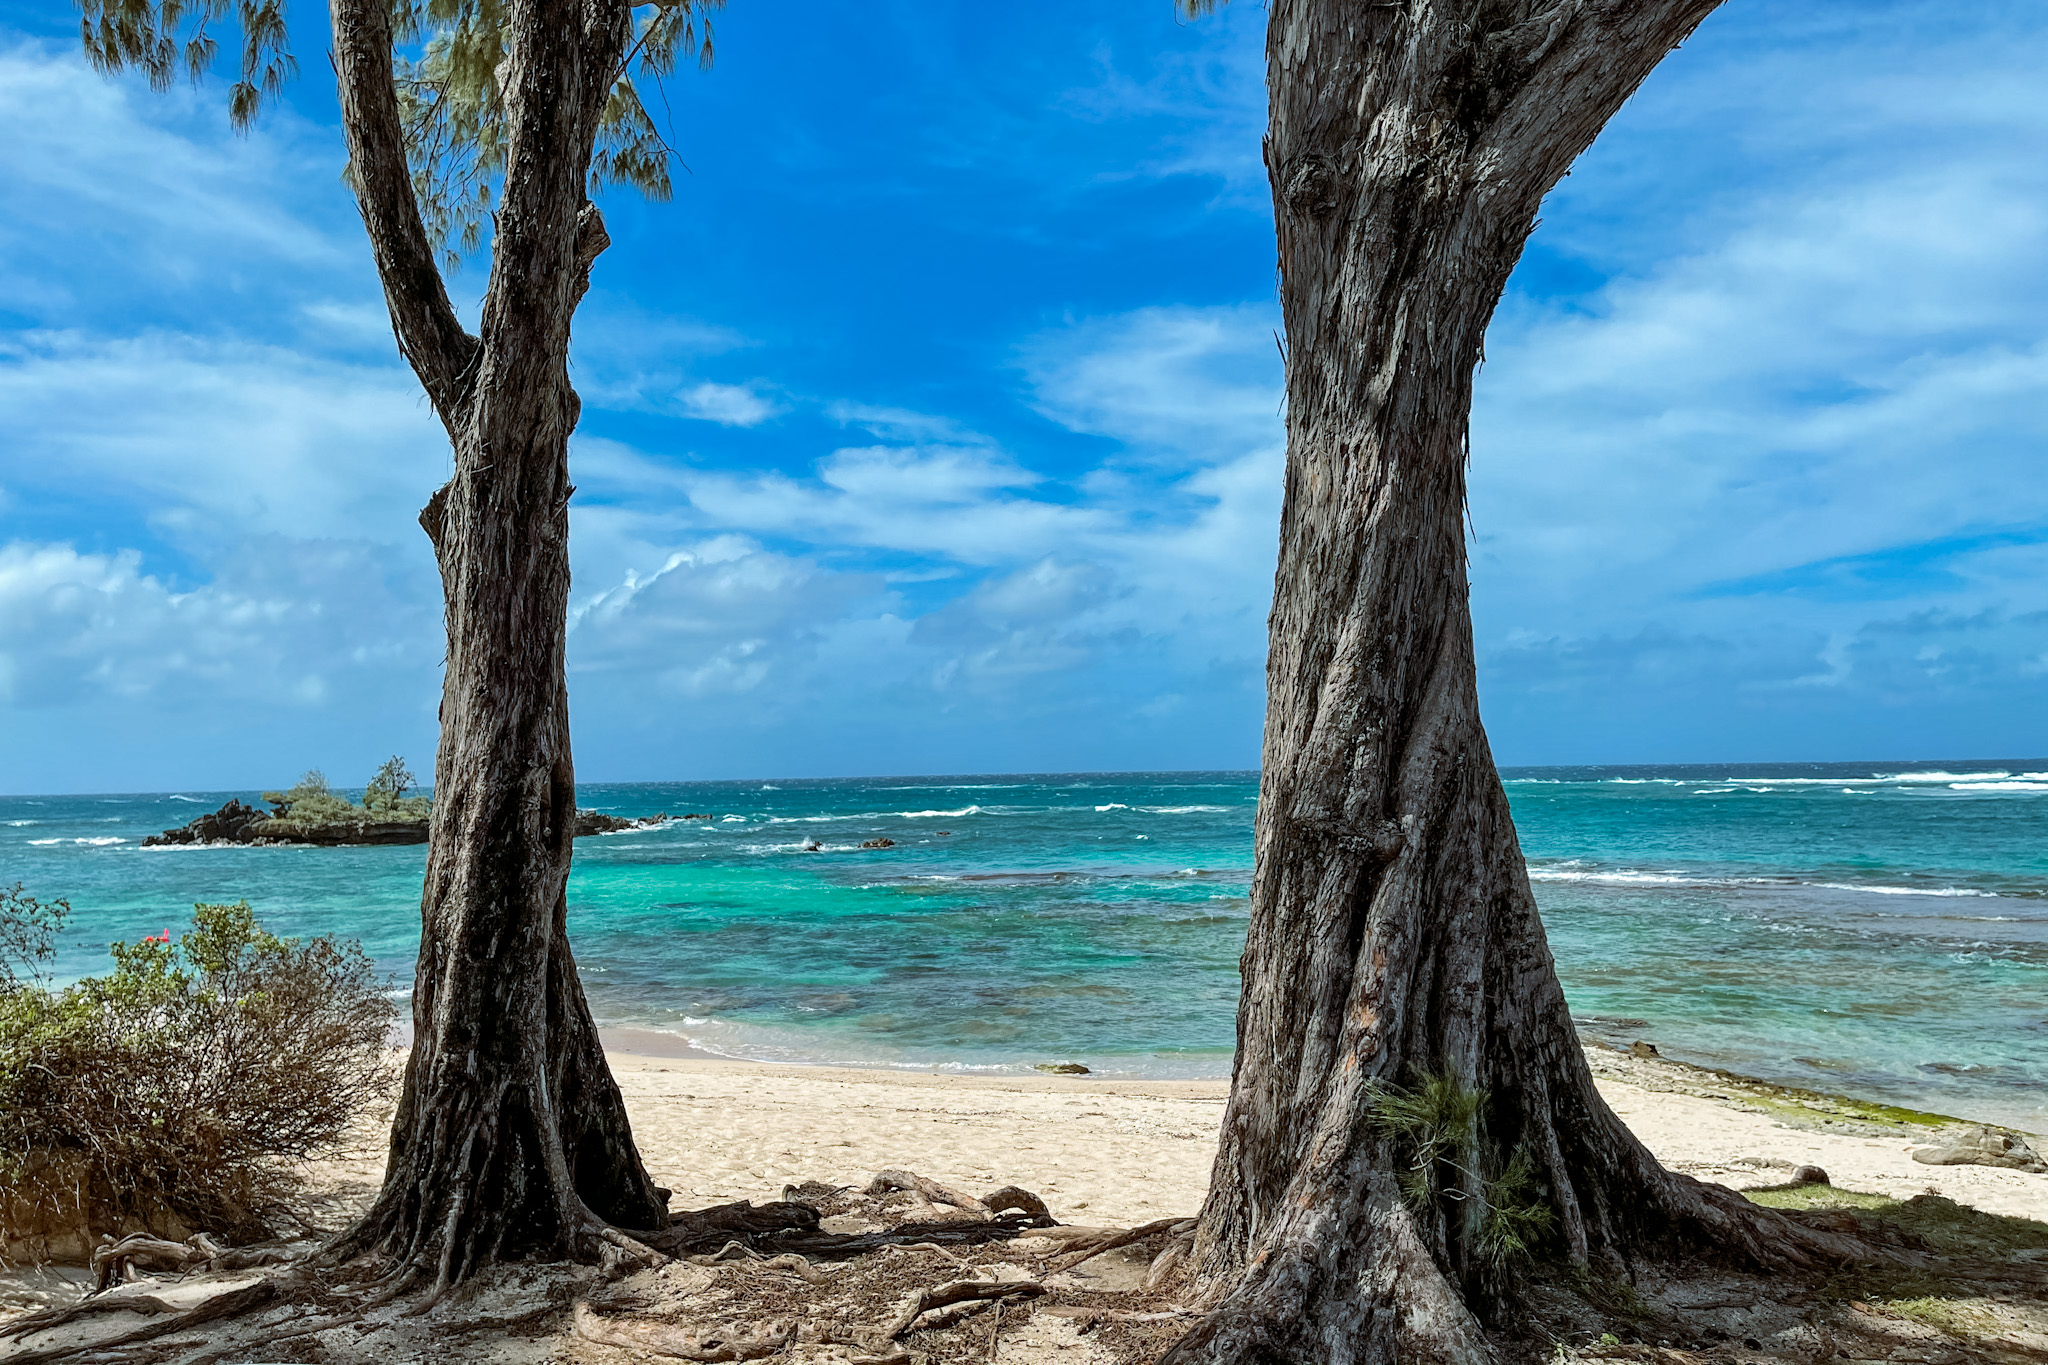 View of Hawaiian North Shore beach with turquoise waters between two trees